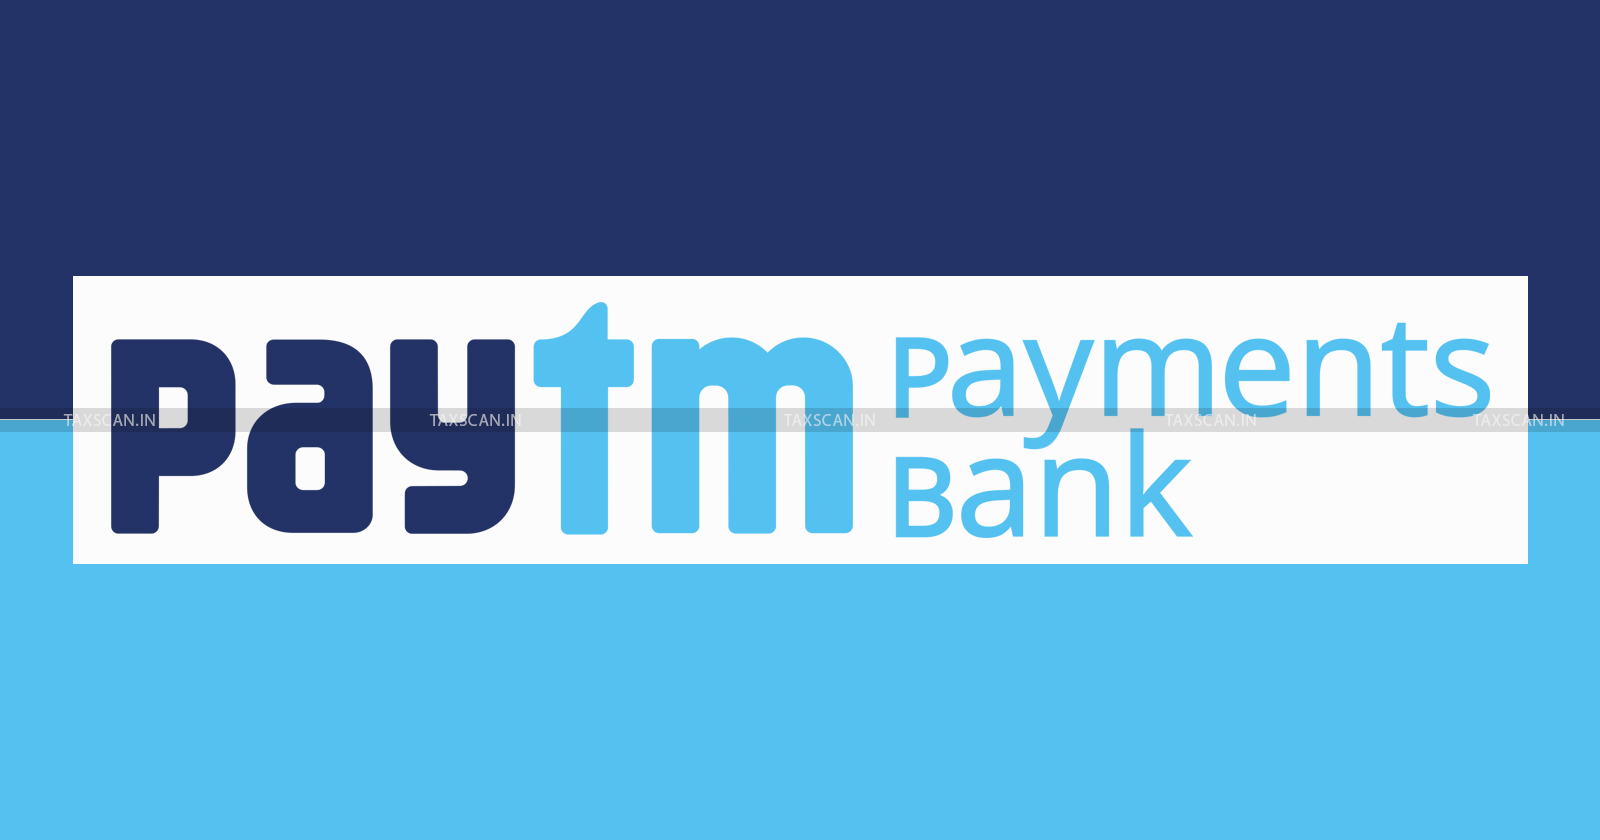 Paytm Payments Bank - EPF Credits - Salaried Citizen Alert - Deposits and Transactions - TAXSCAN